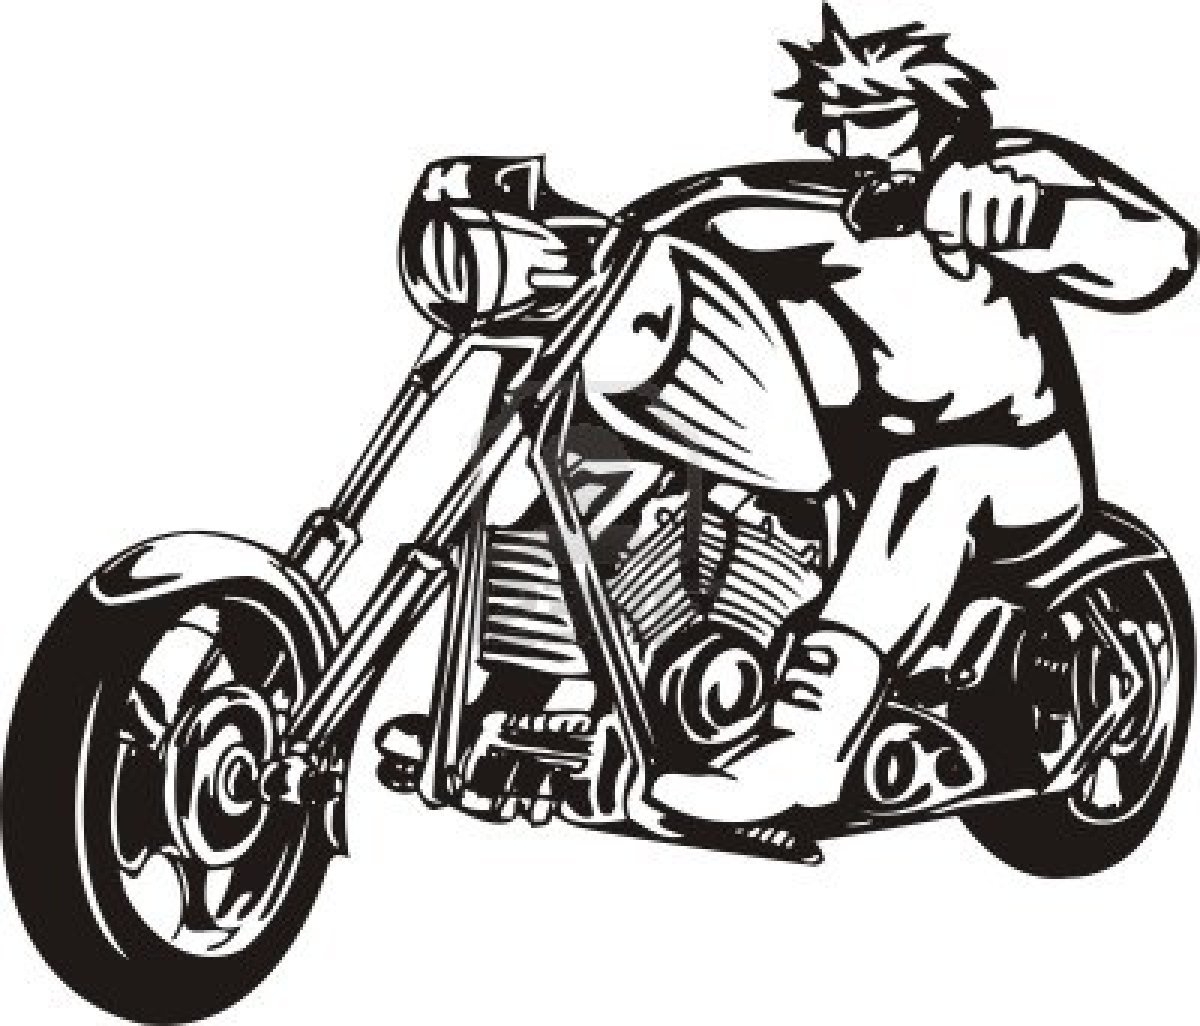 Free Harley Davidson Motorcycle Clipart Black And White.